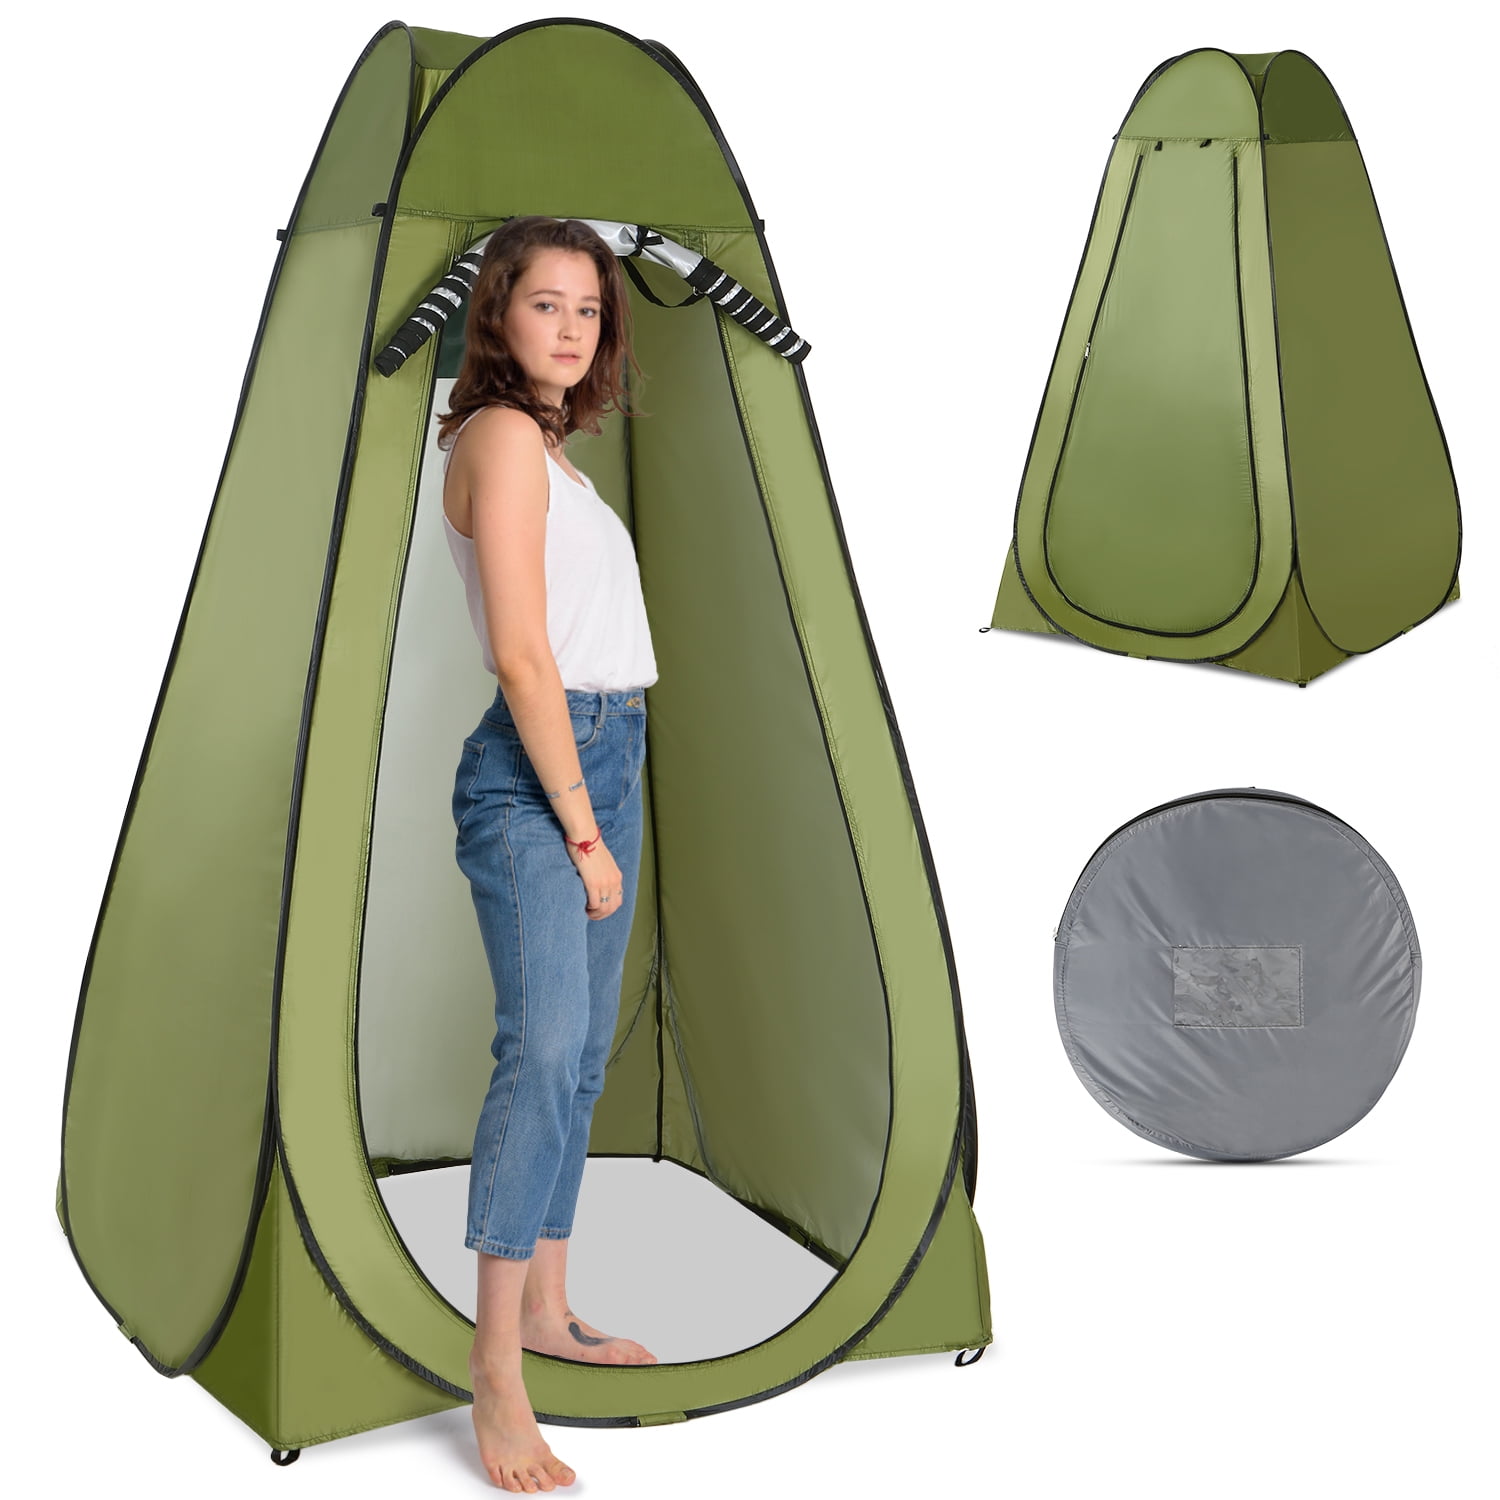 Portable Pop Up Camping Tent Toilet Shower Beach Tent Outdoor Changing Room New 